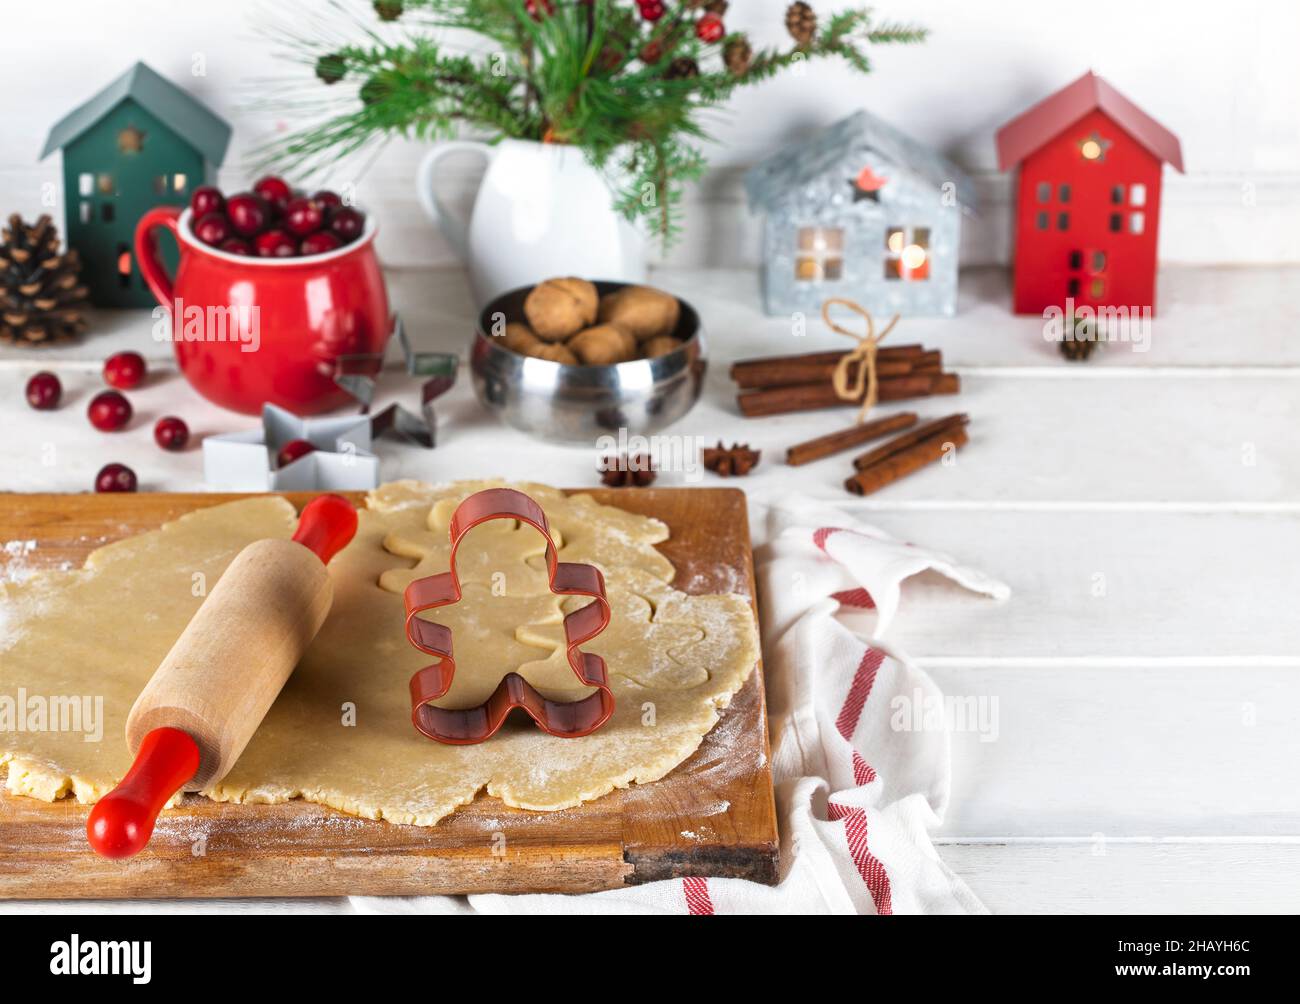 Gingerbread man cookie cutter and rolling pin on cookie dough with Christmas decorations on a table Stock Photo